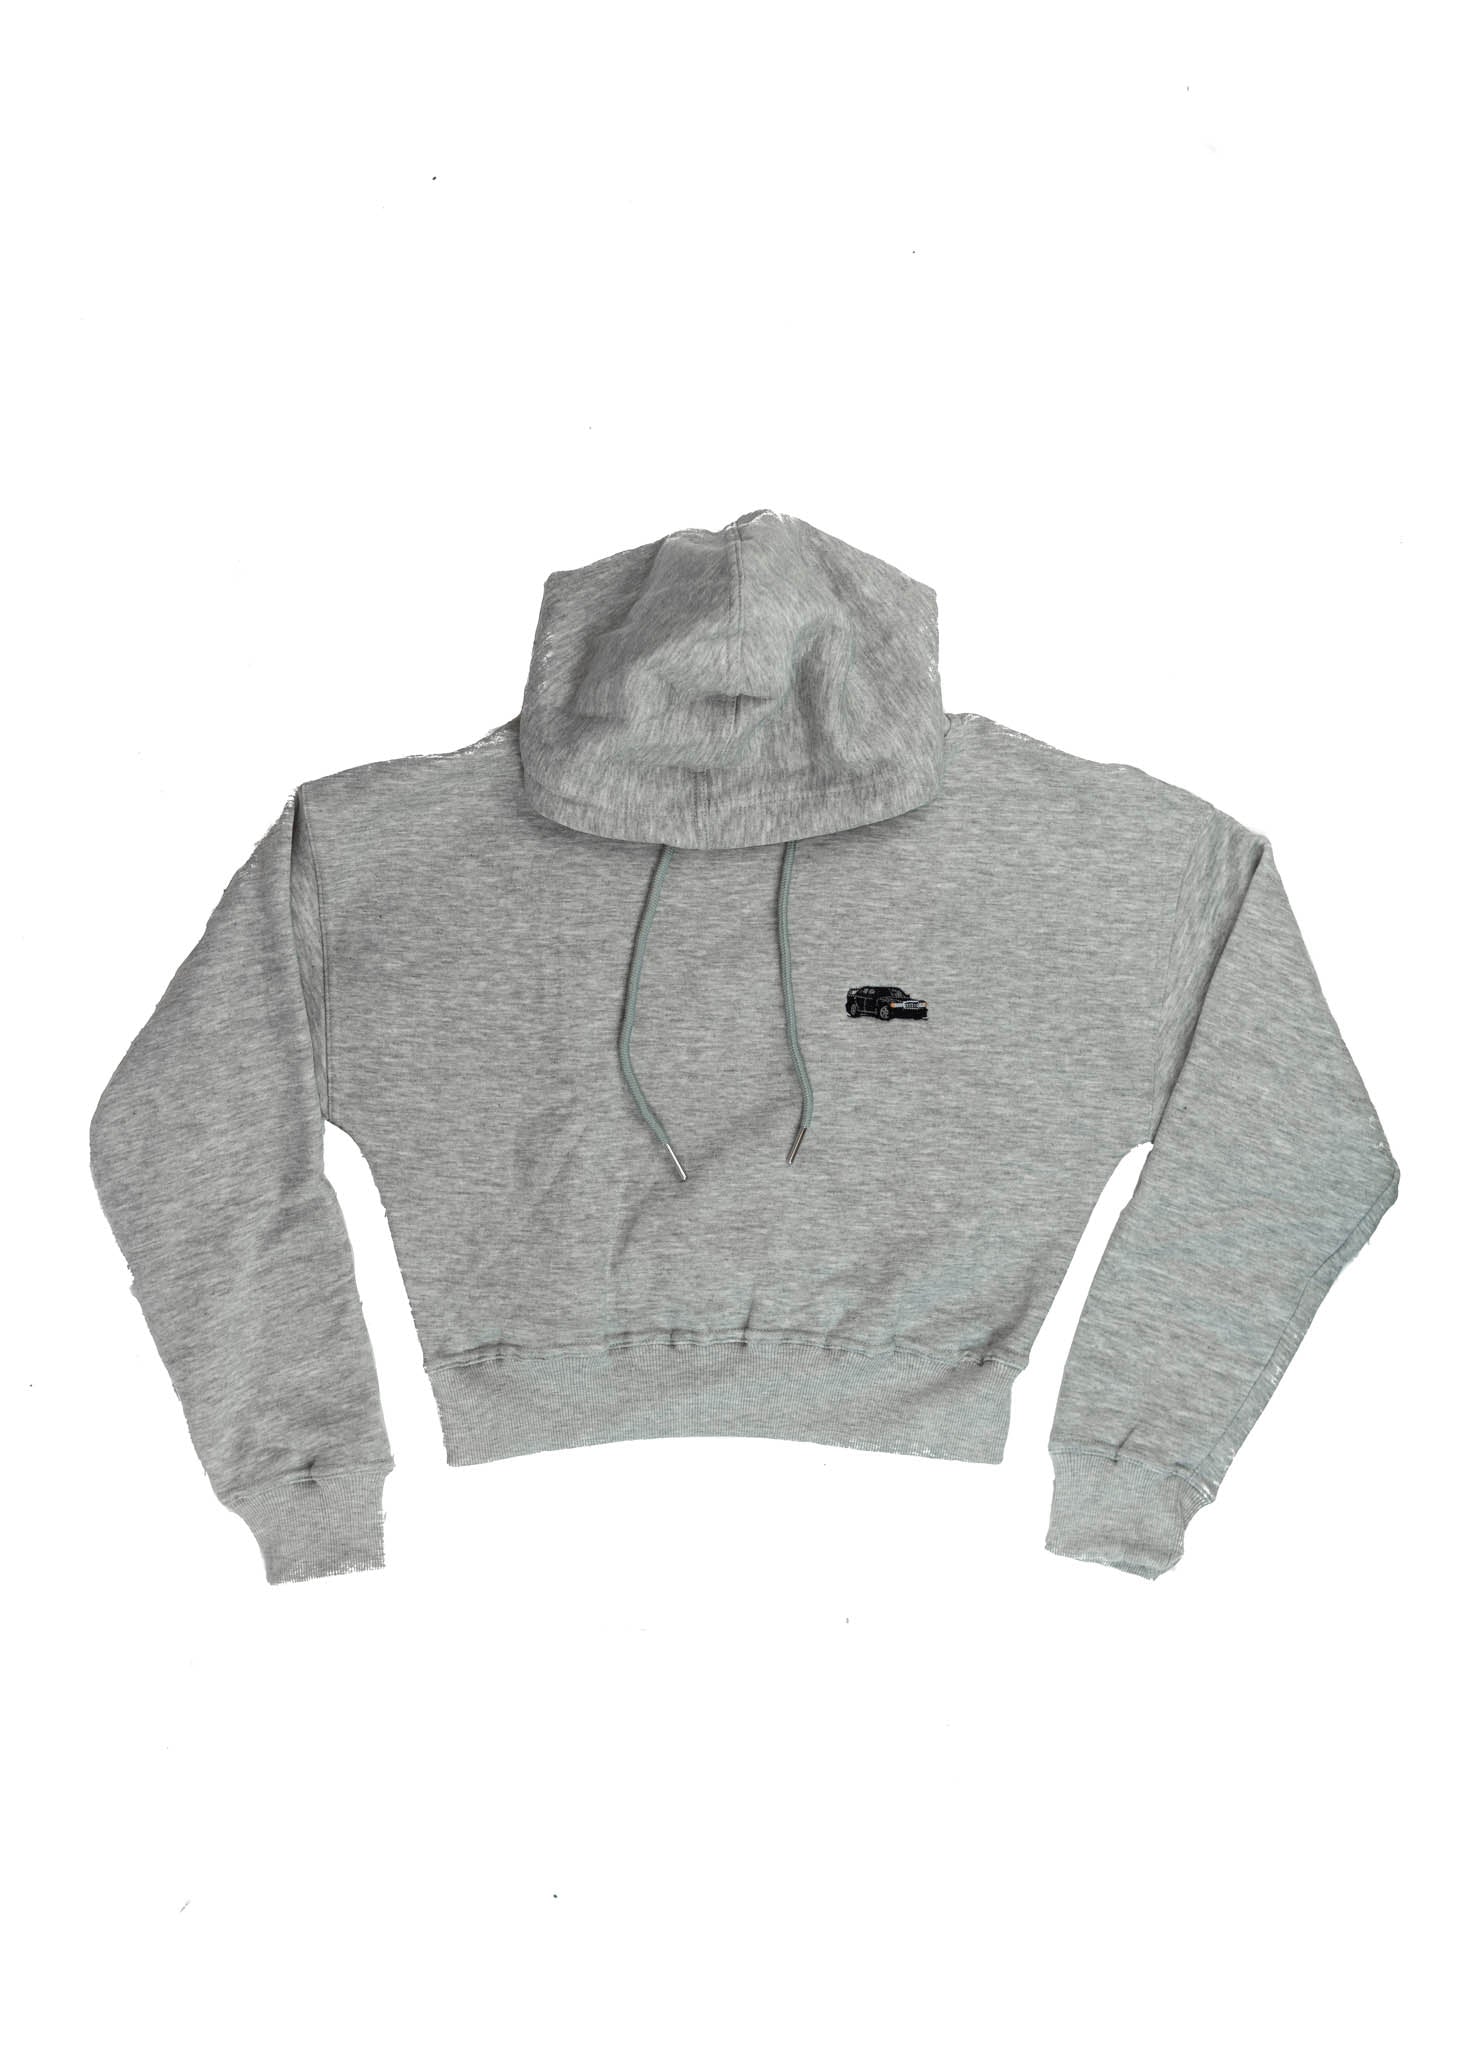 A grey Mercedes-Benz cropped hoodie for women. Photo is a front view of the cropped sweater with an embroidered W201 190E 2.5-16 Evo II. Fabric composition is 100% cotton. The material is soft, comfortable, breathable, and non-transparent. The style of this crop hoodie is long sleeve, crewneck with a hood, hooded, with embroidery on the chest.